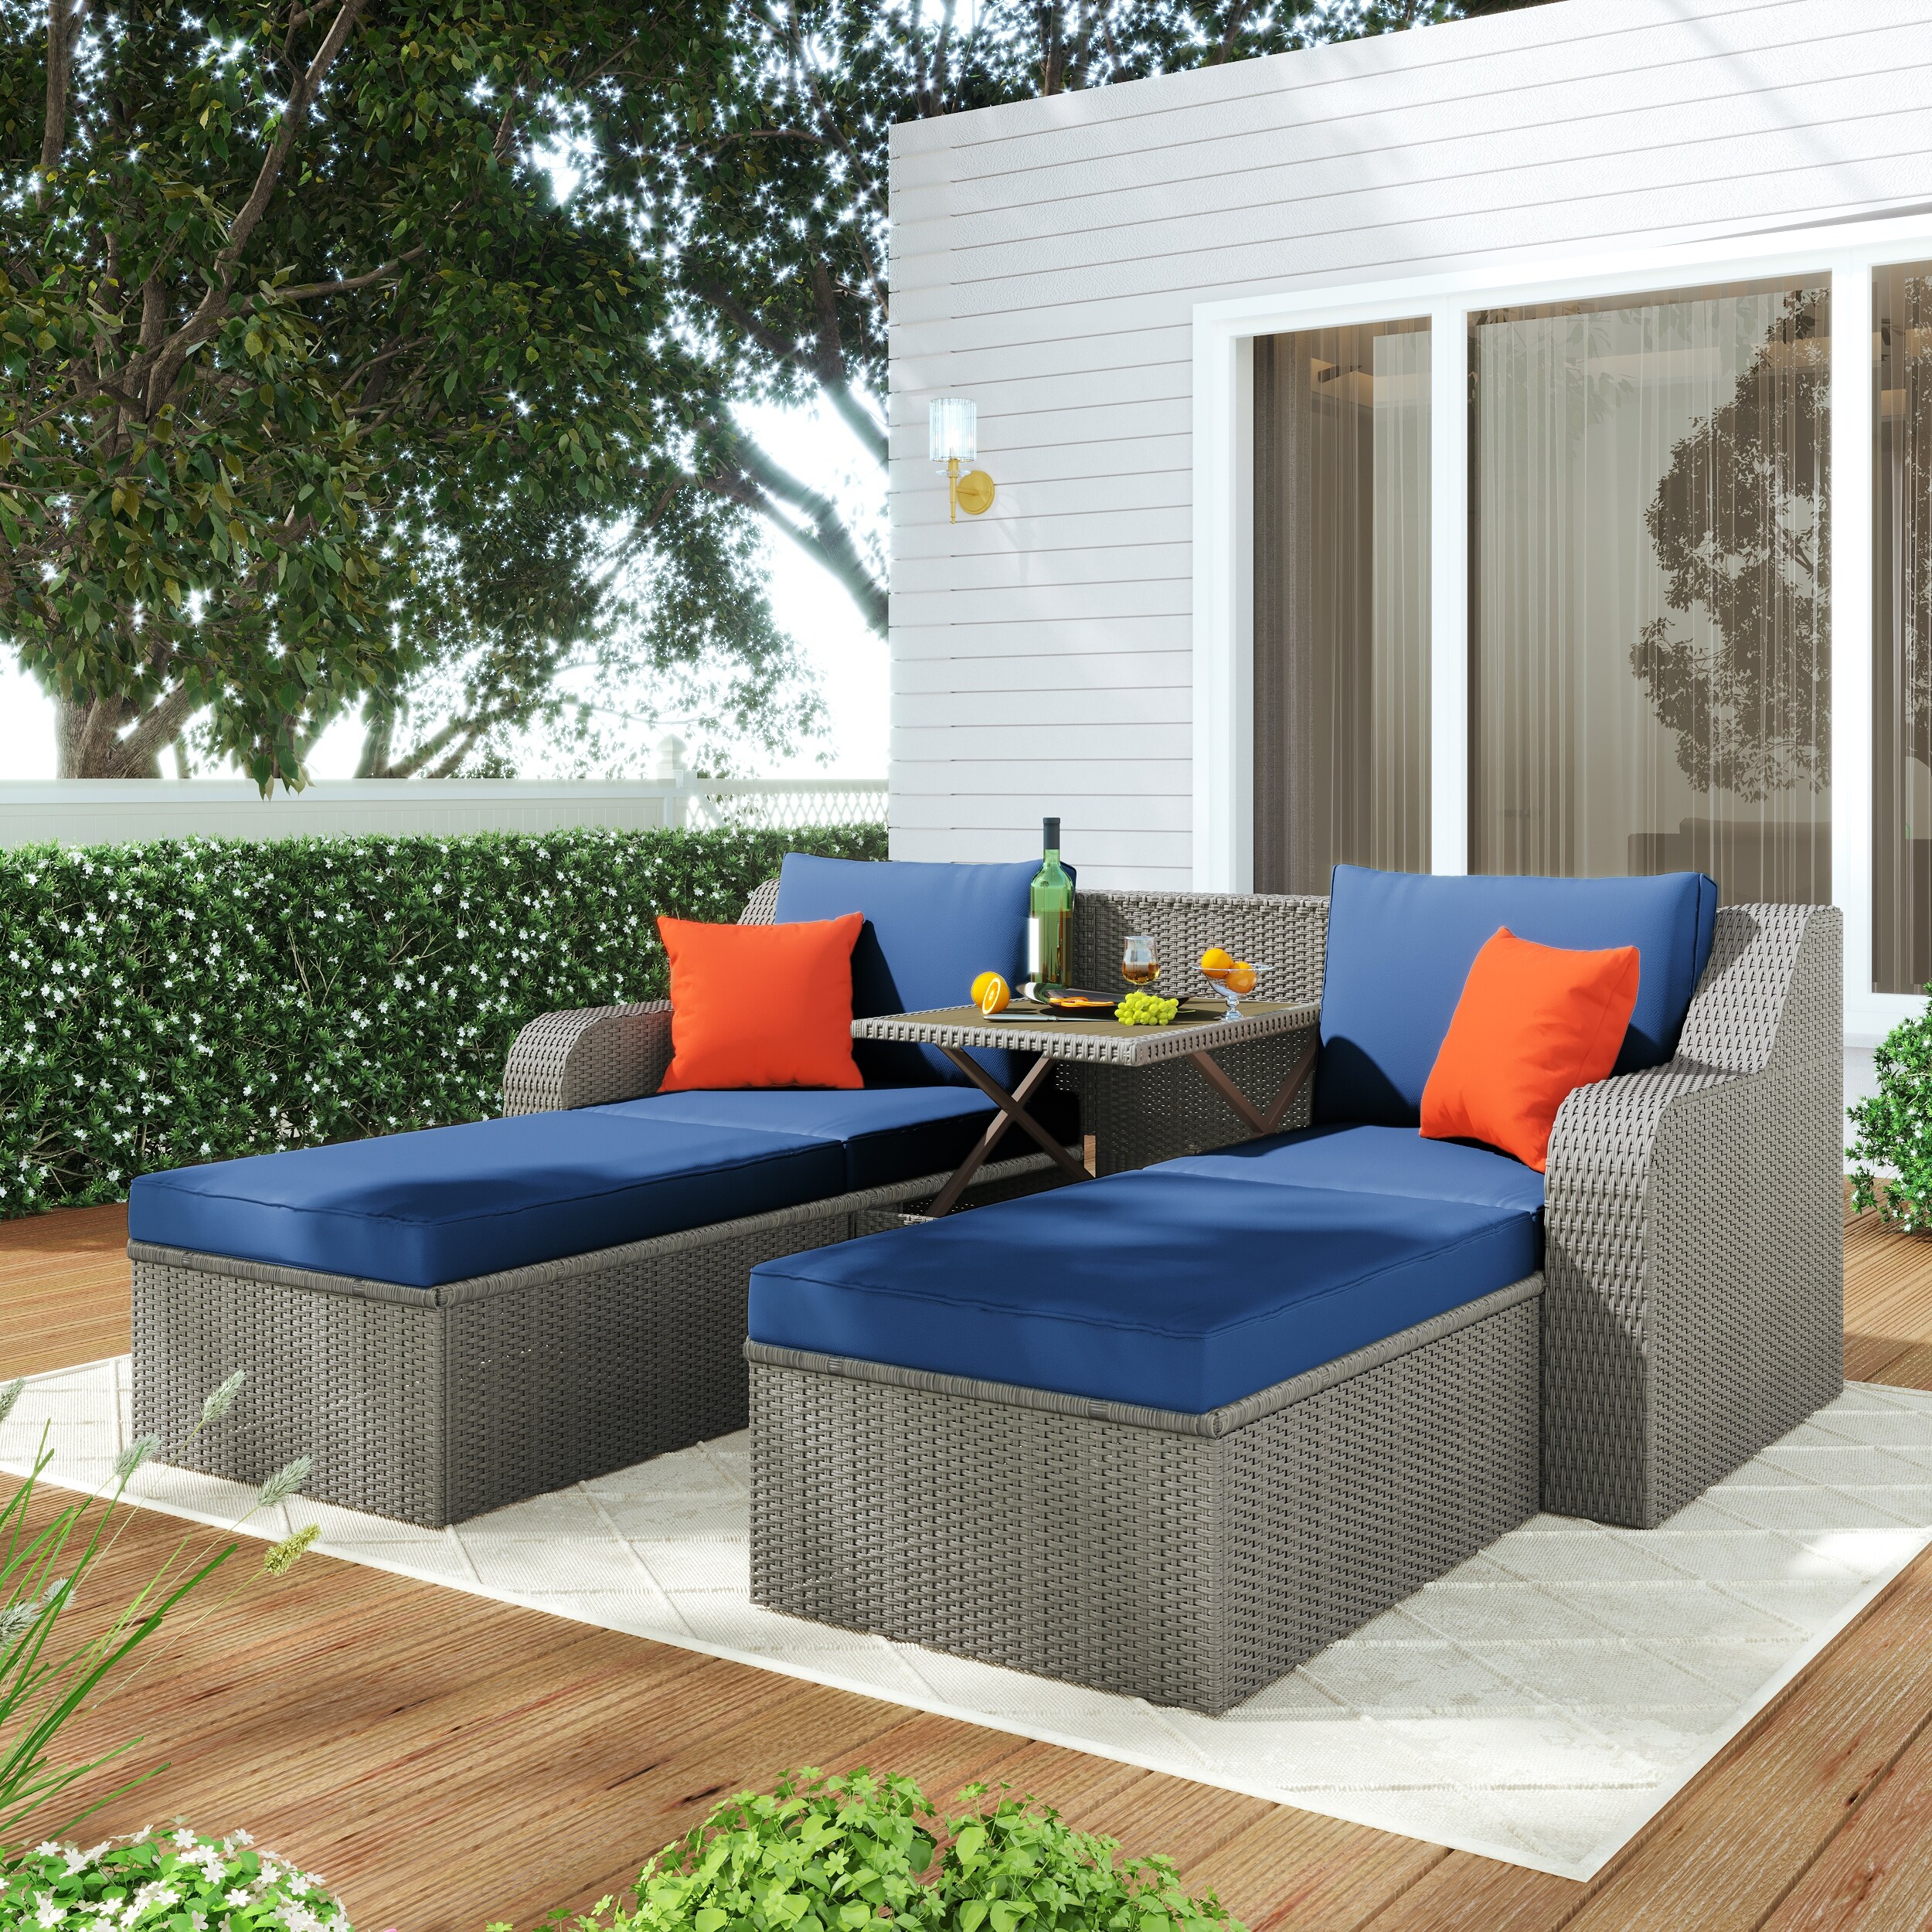 Global Pronex Patio Furniture Sets  3-piece Patio Wicker Sofa With Cushions  Ottomans And Lift Top Coffee Table